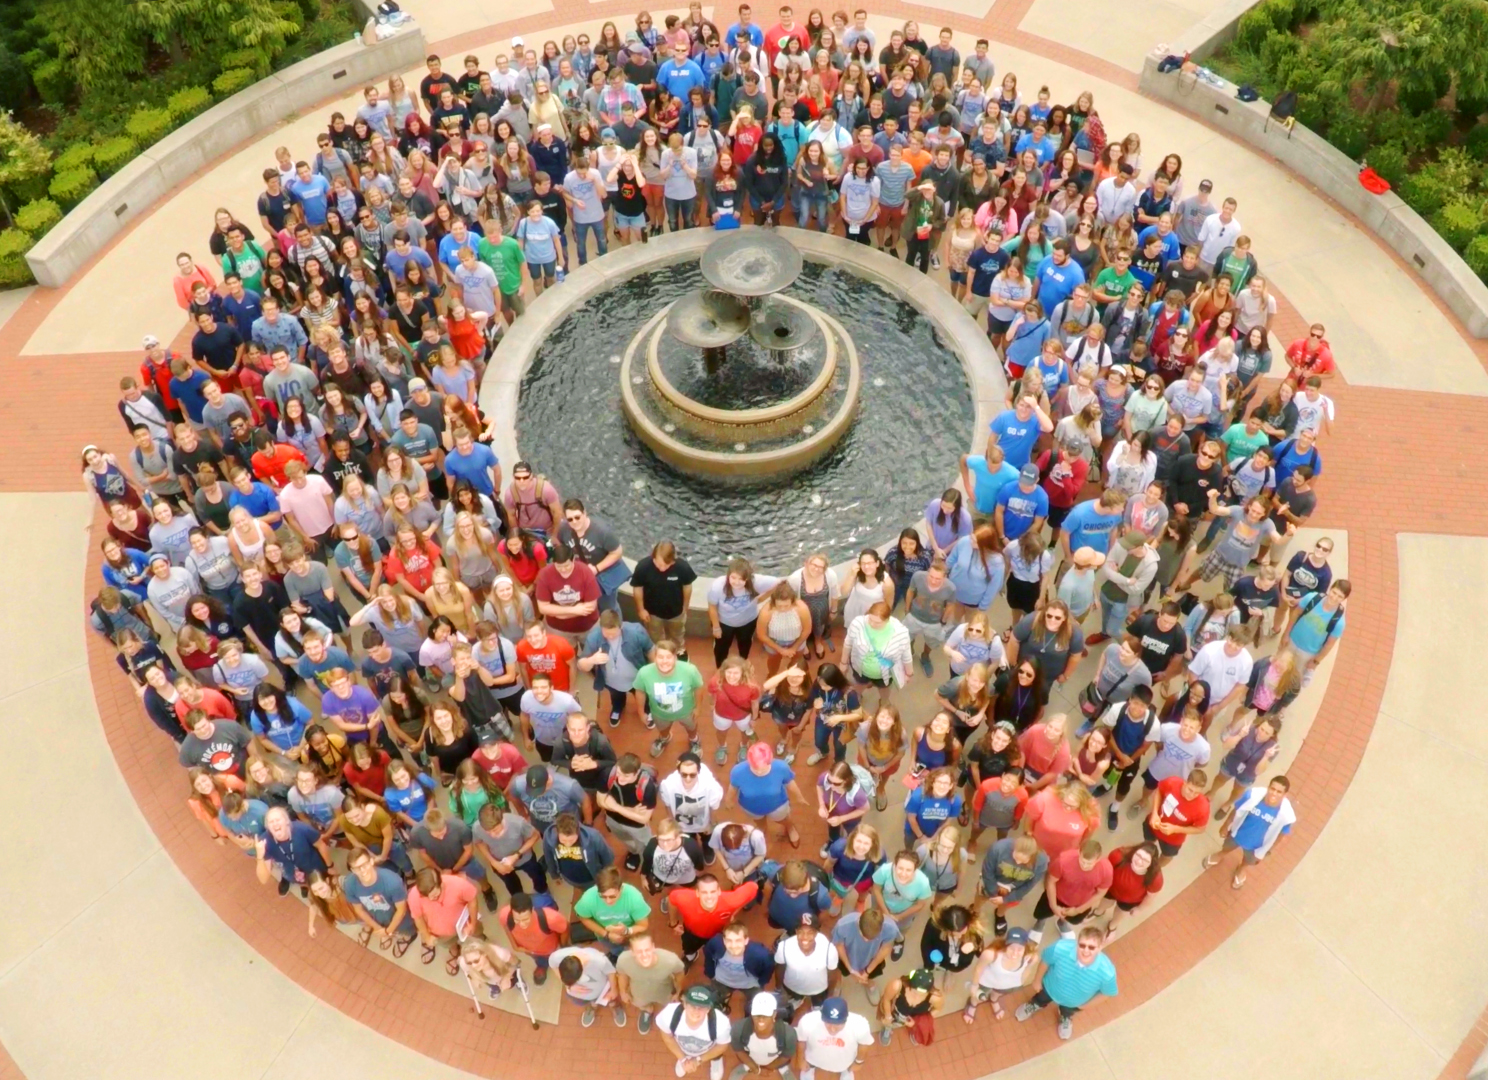 JBU Welcomes Over 400 New Students